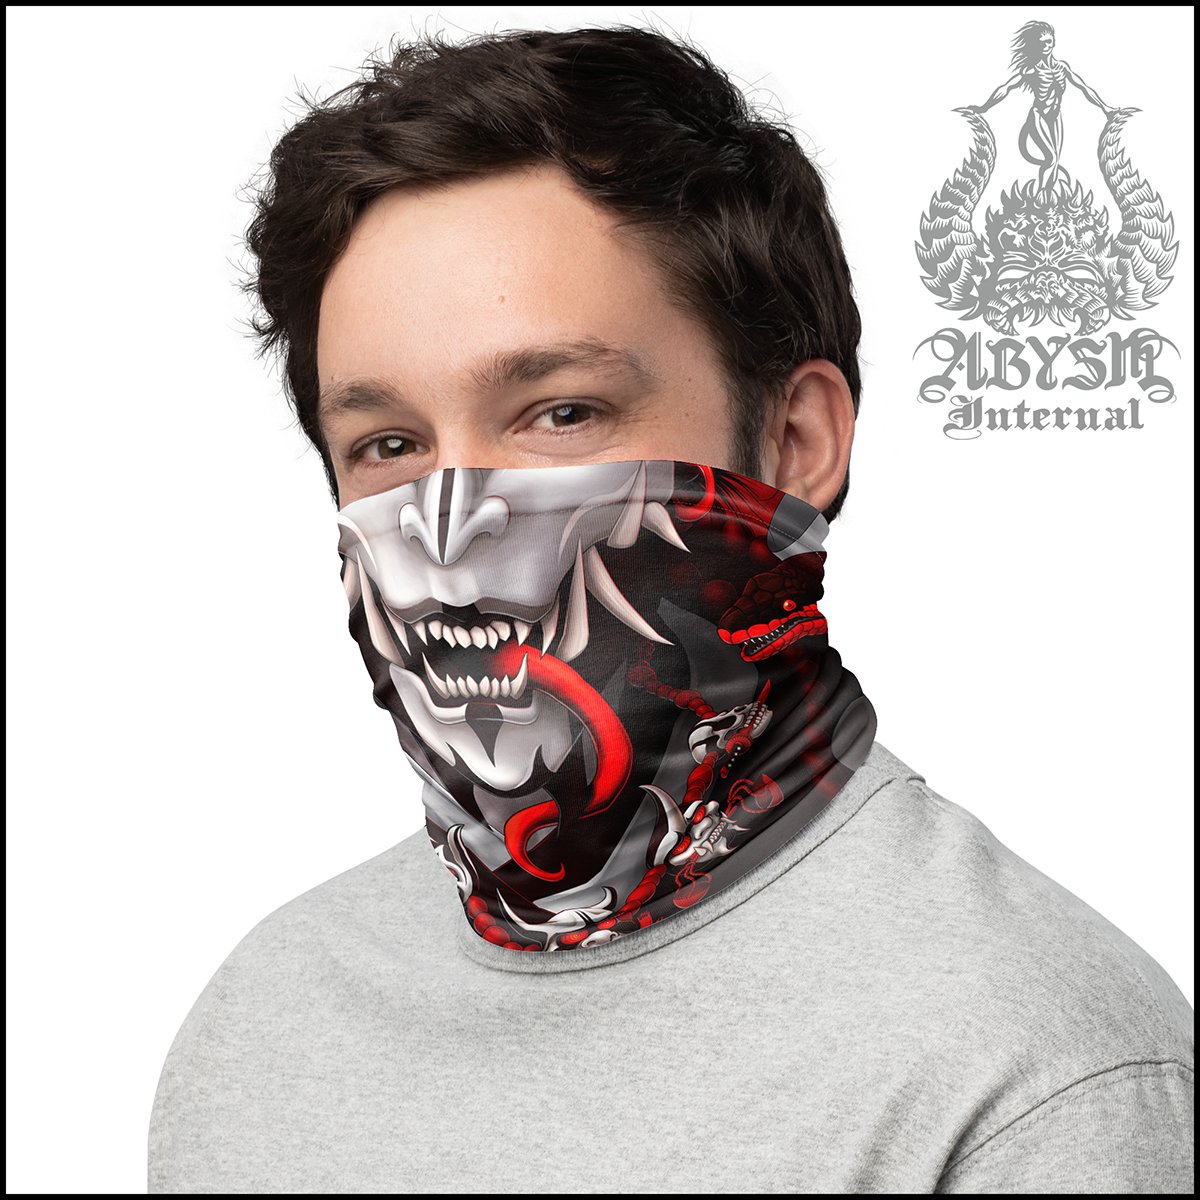 Demon Neck Gaiter, Oni Face Mask, Japanese Hannya Printed Head Covering, Skater Street Outfit, Snake, Fangs, Headband - White Goth Red - Abysm Internal